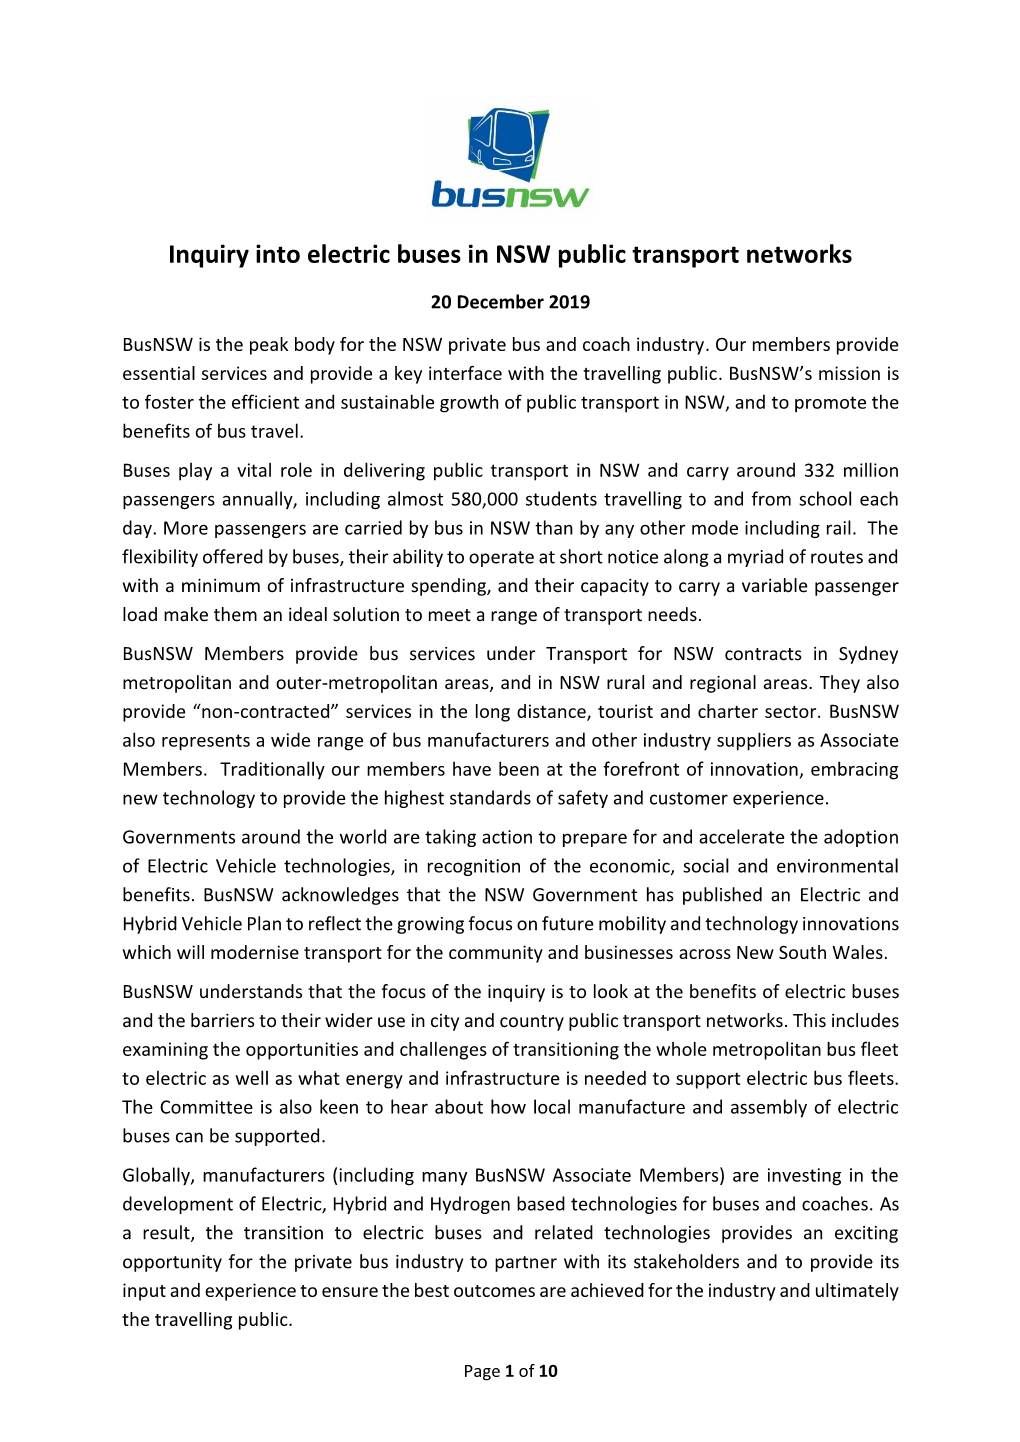 Inquiry Into Electric Buses in NSW Public Transport Networks